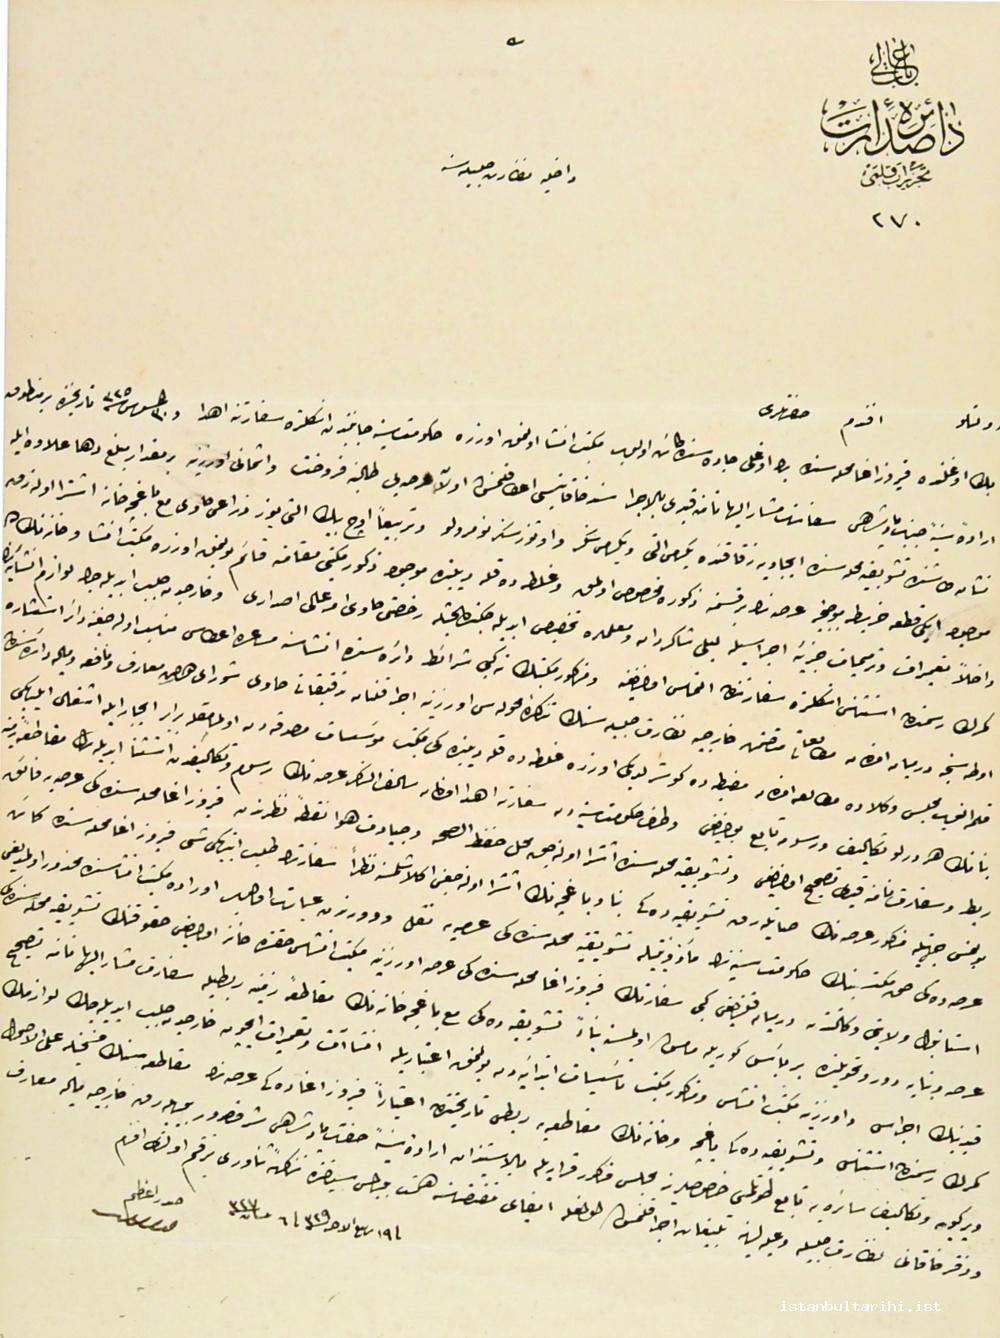 1- Grand vizier Hakkı Paşa’s letter dated 19 April 1911 to Ministry of Internal Affairs regarding that all requirements for the construction of British school in Beyoğlu had been met and there were no problems to build it (BOA, DH.İD, no.117/32)